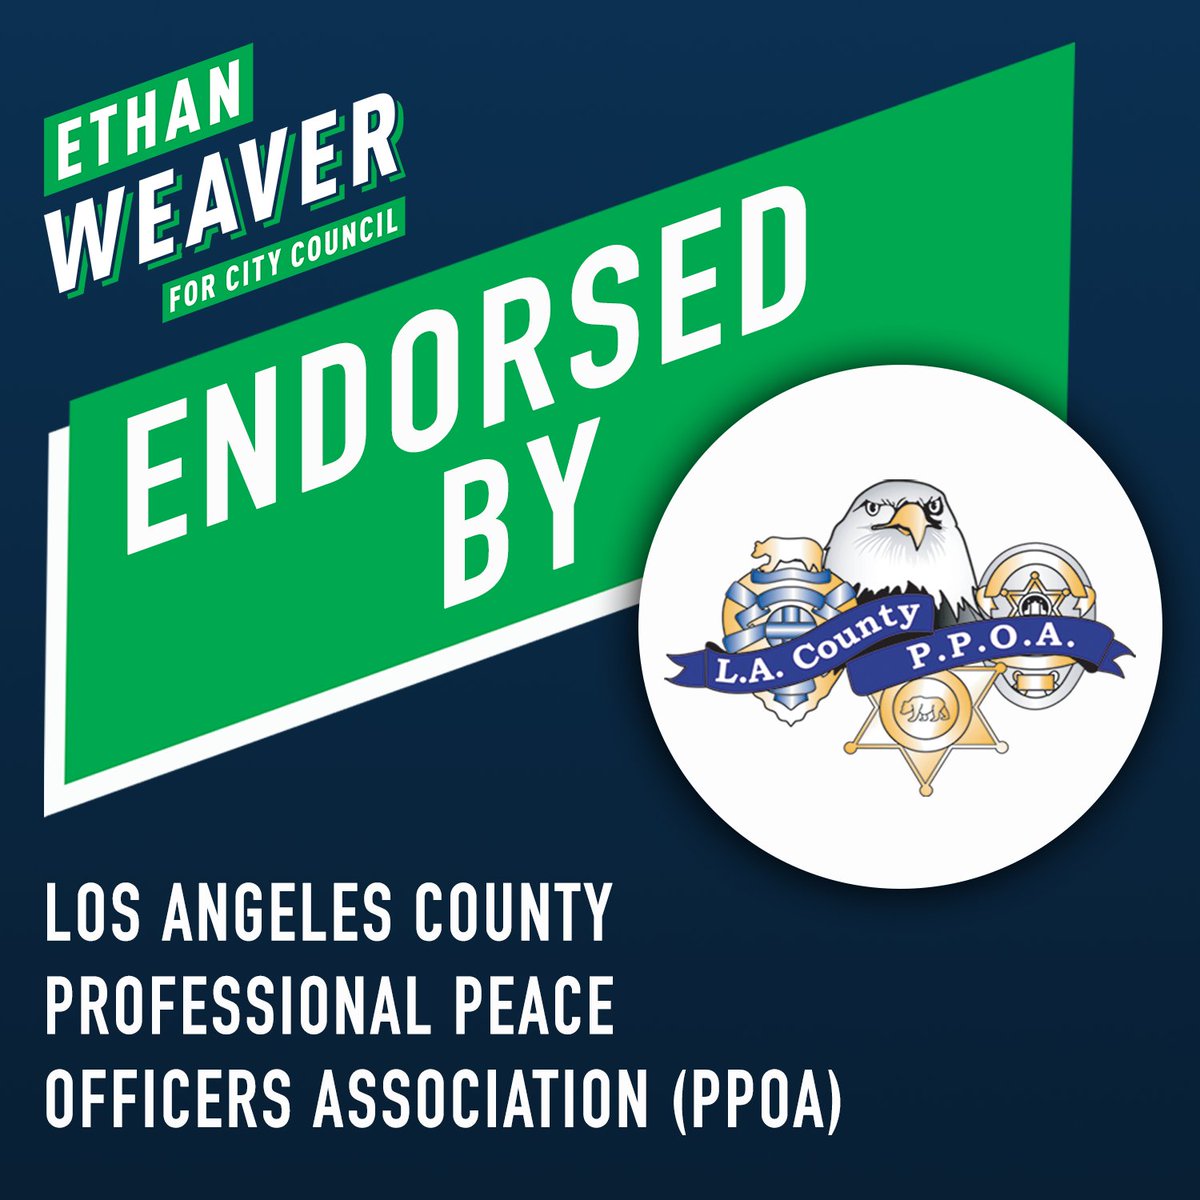 Our communities deserve a City Councilmember who will prioritize public safety and investments in emergency responders. I'm proud to be backed by the dedicated members of @lappoa as we fight to create safer neighborhoods across Los Angeles.